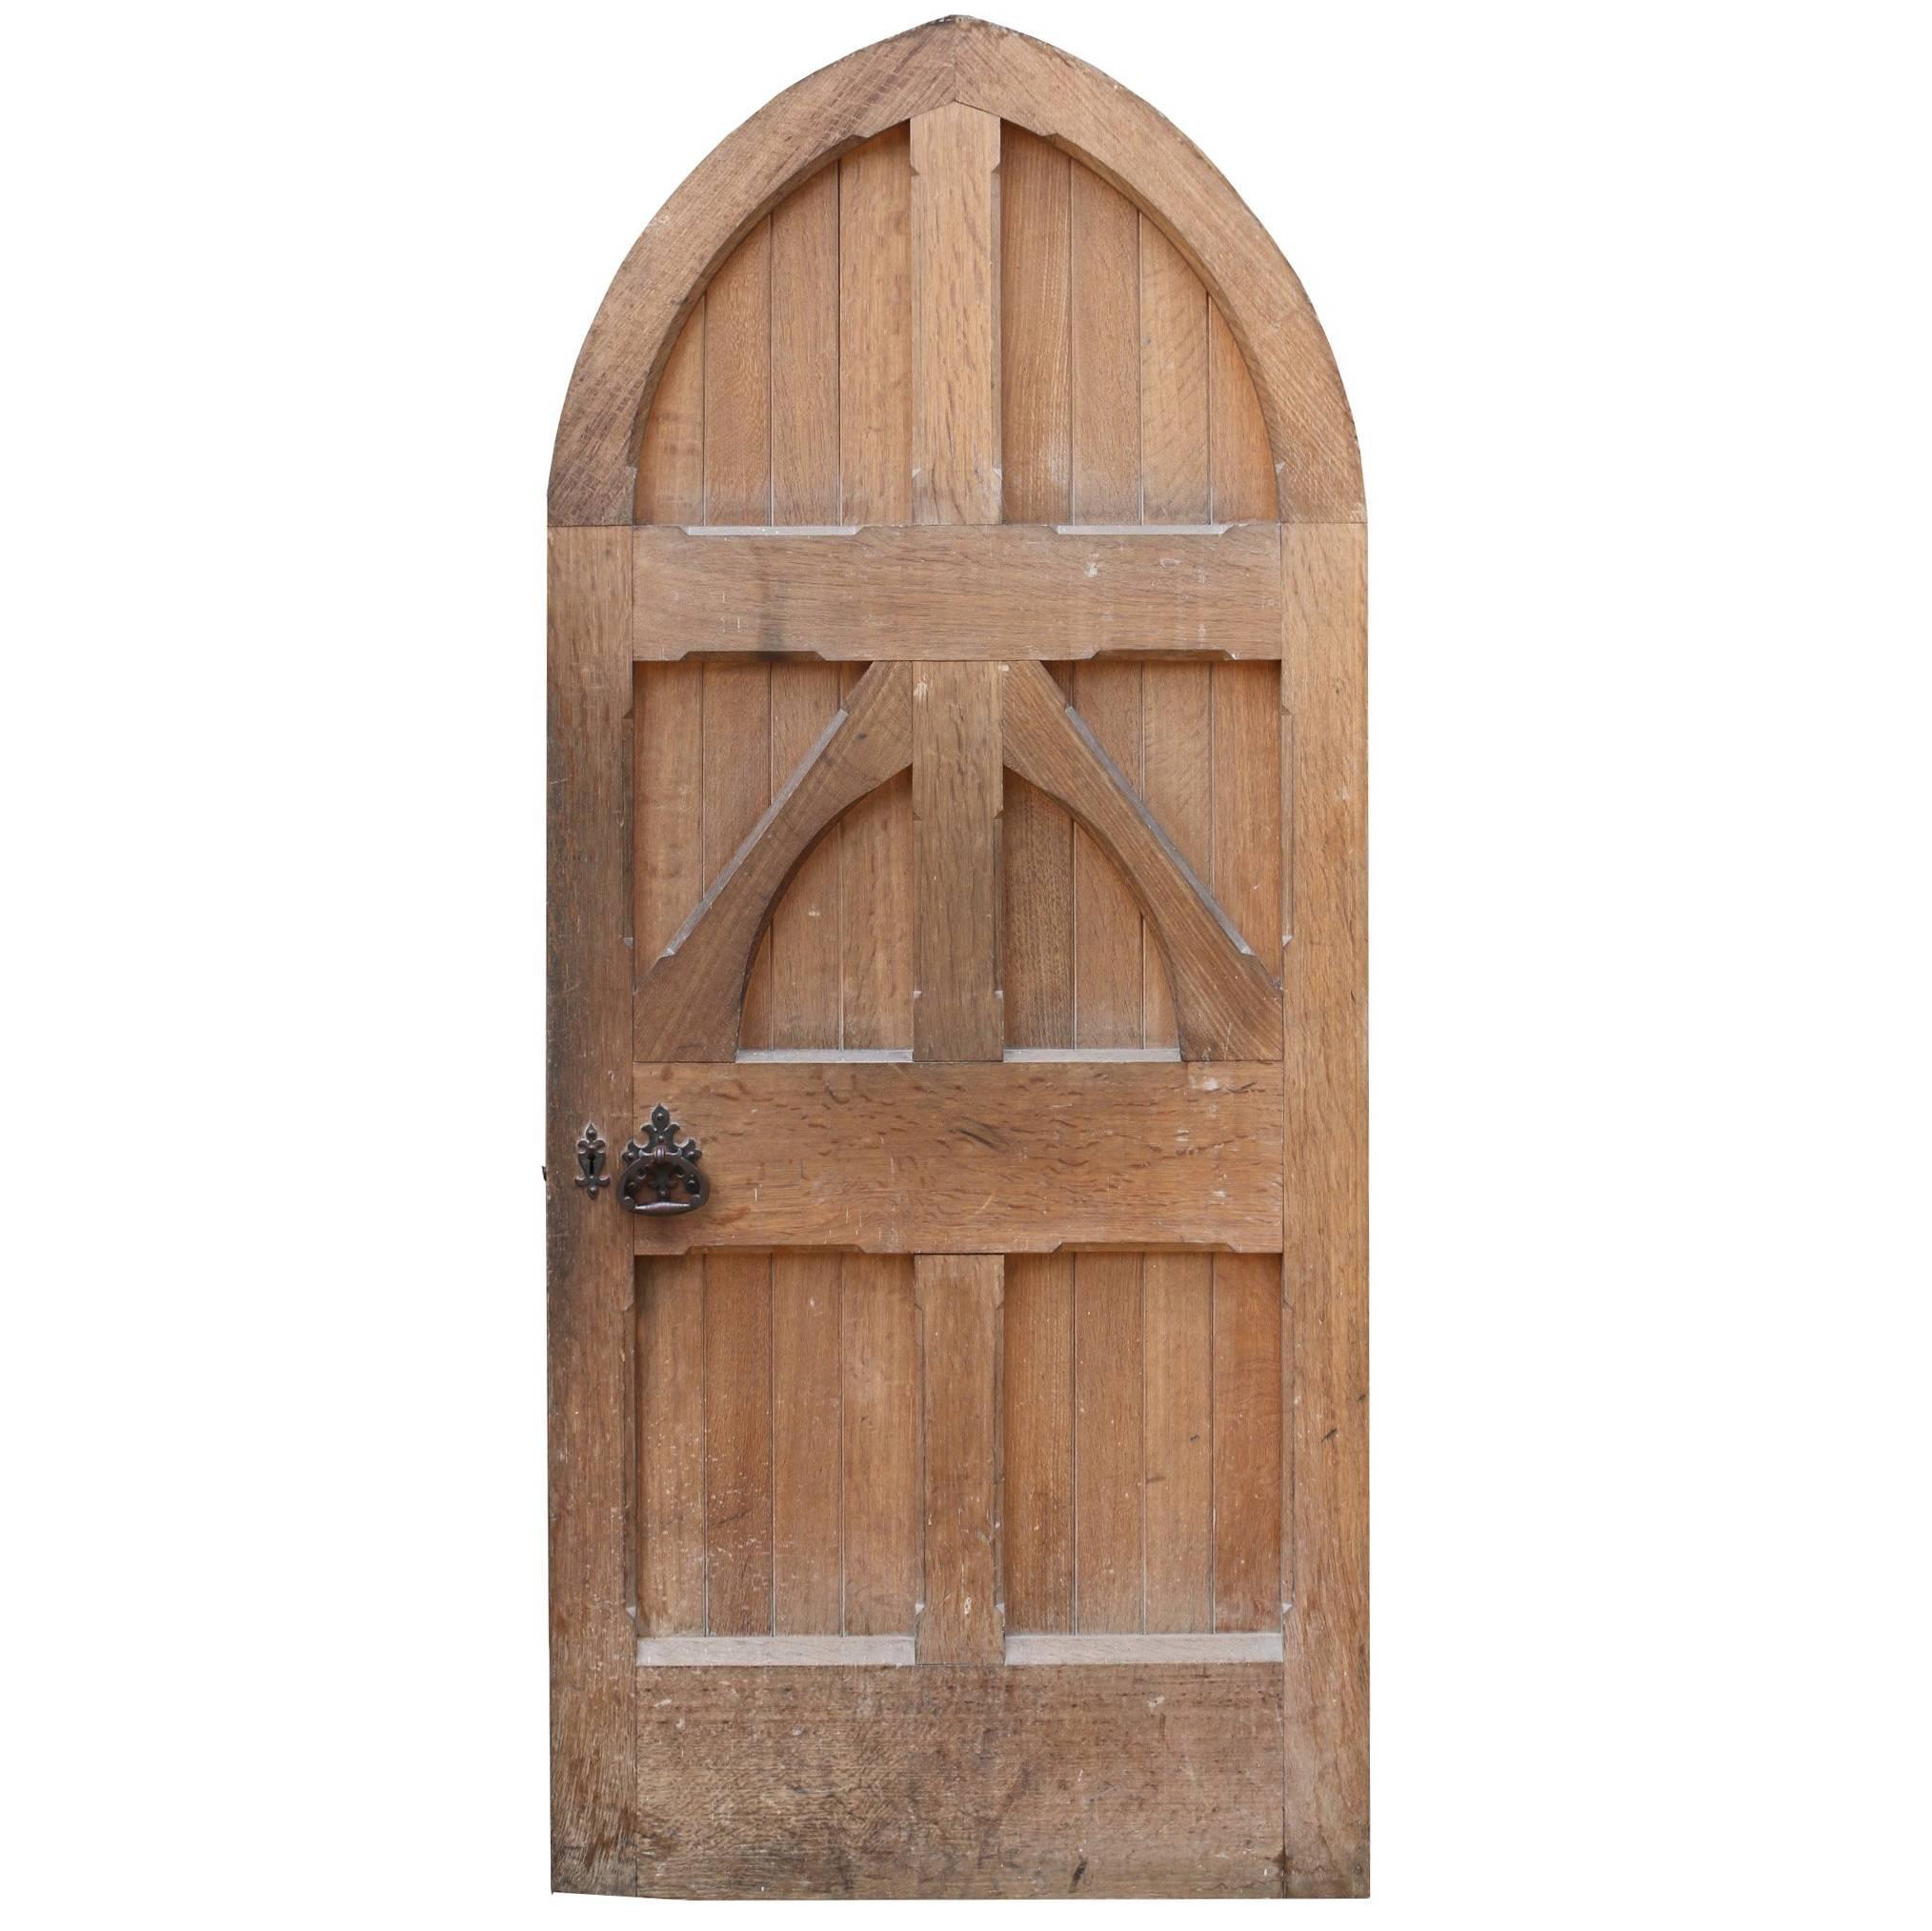 Late 19th Century English Arched Oak Front Door